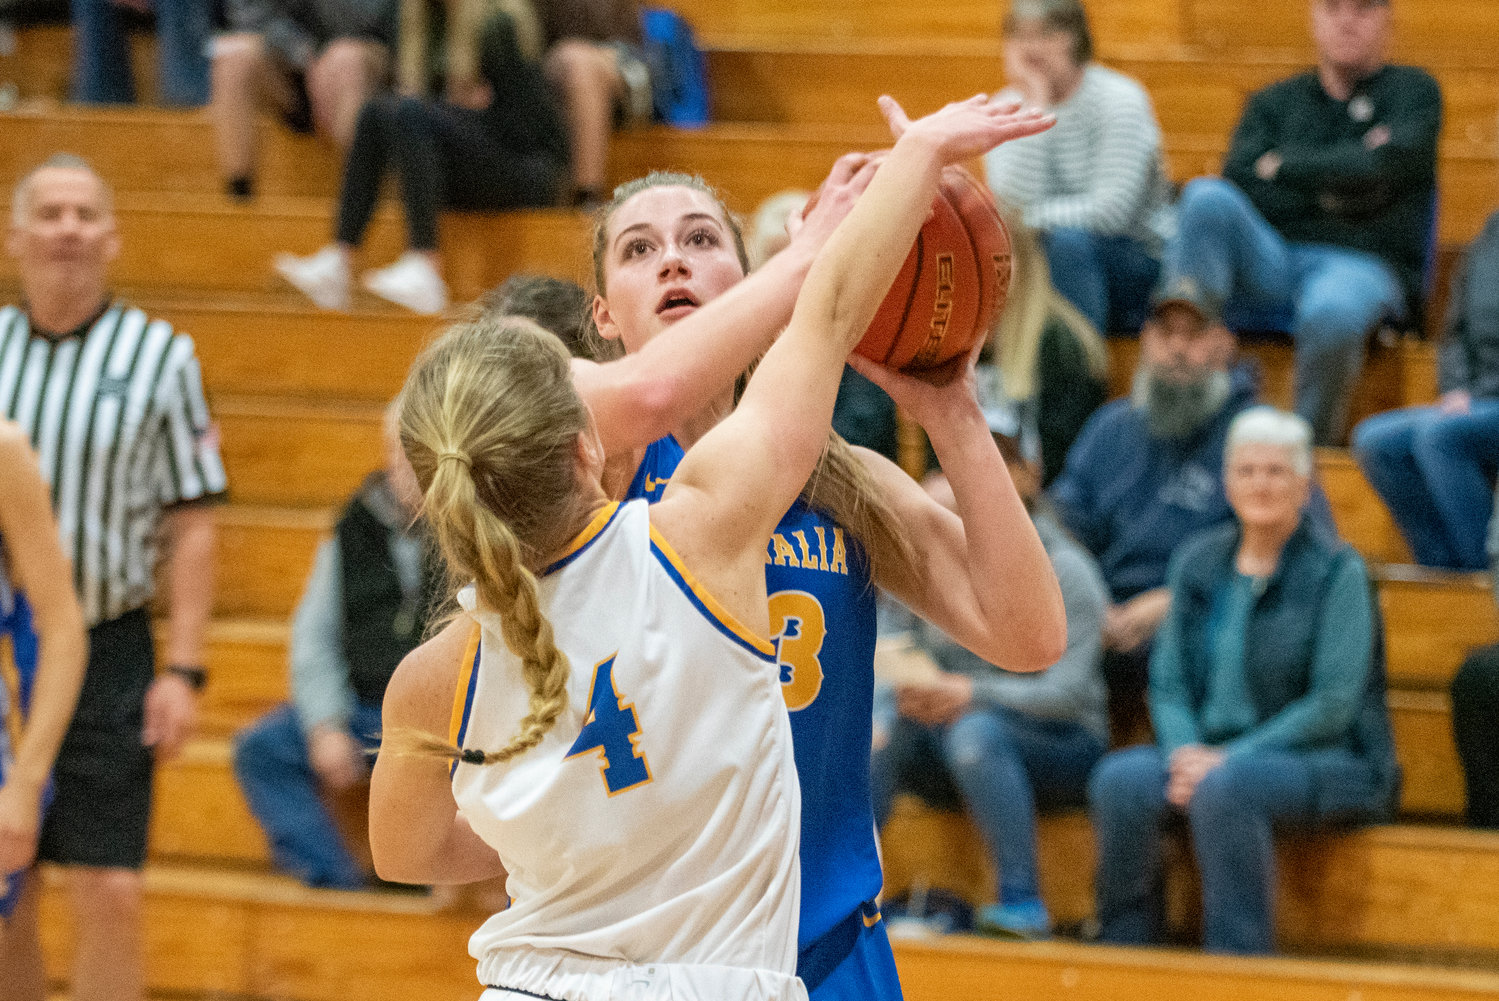 Winlock's Addison Hall shoots a jumper against Tumwater's Isabella Lund (4) during the SWW Senior All-Star Game on March 26.